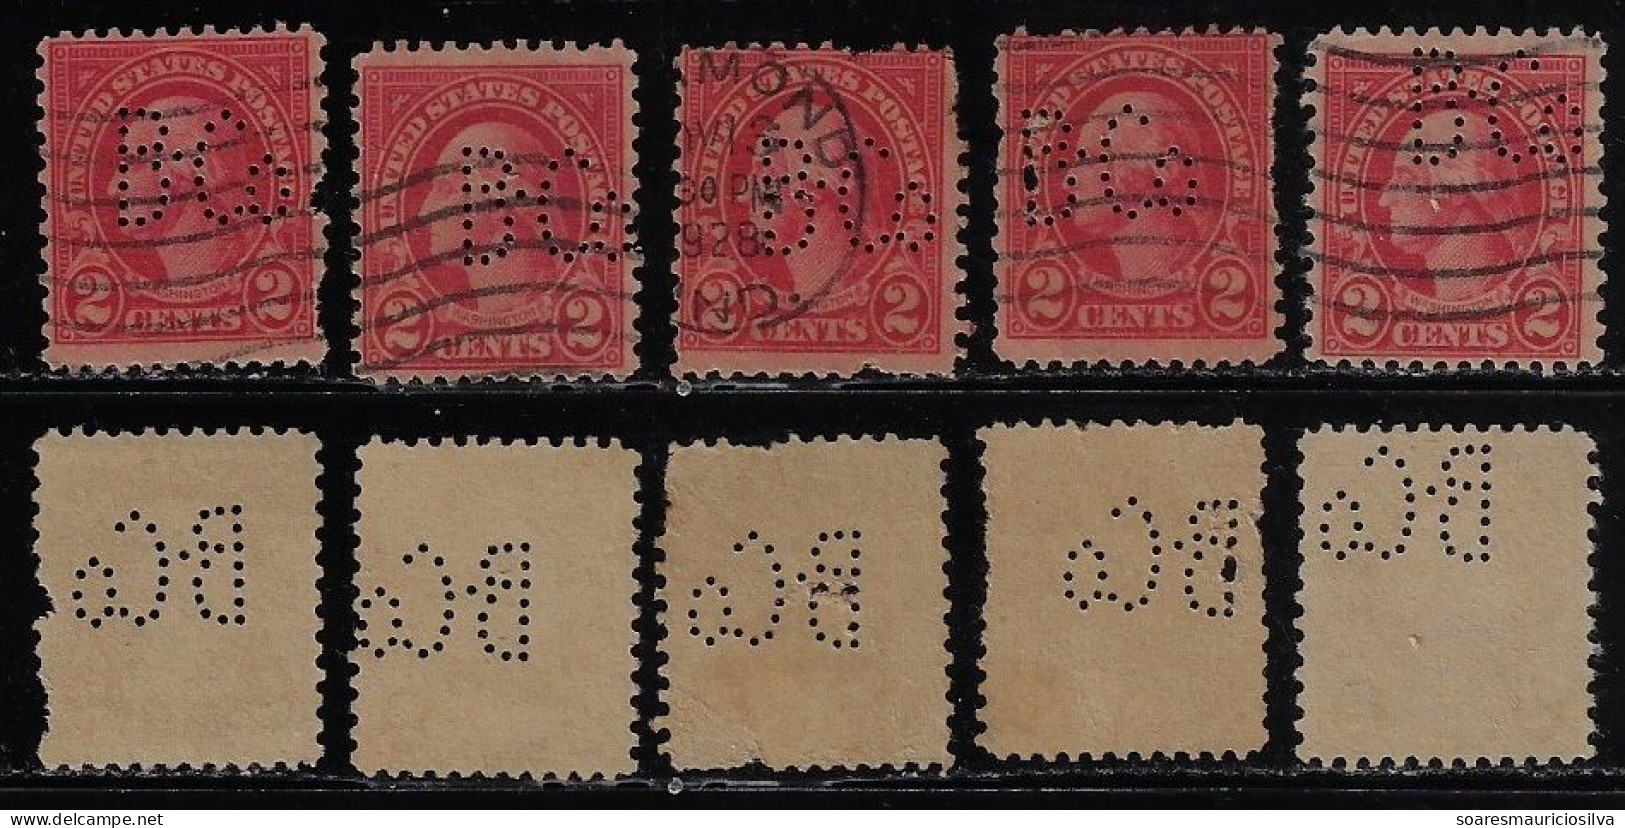 USA United States 1923/1934 5 Stamp With Perfin B.Co By Frank S. Betz Company From Hammond Lochung Perfore - Perfin